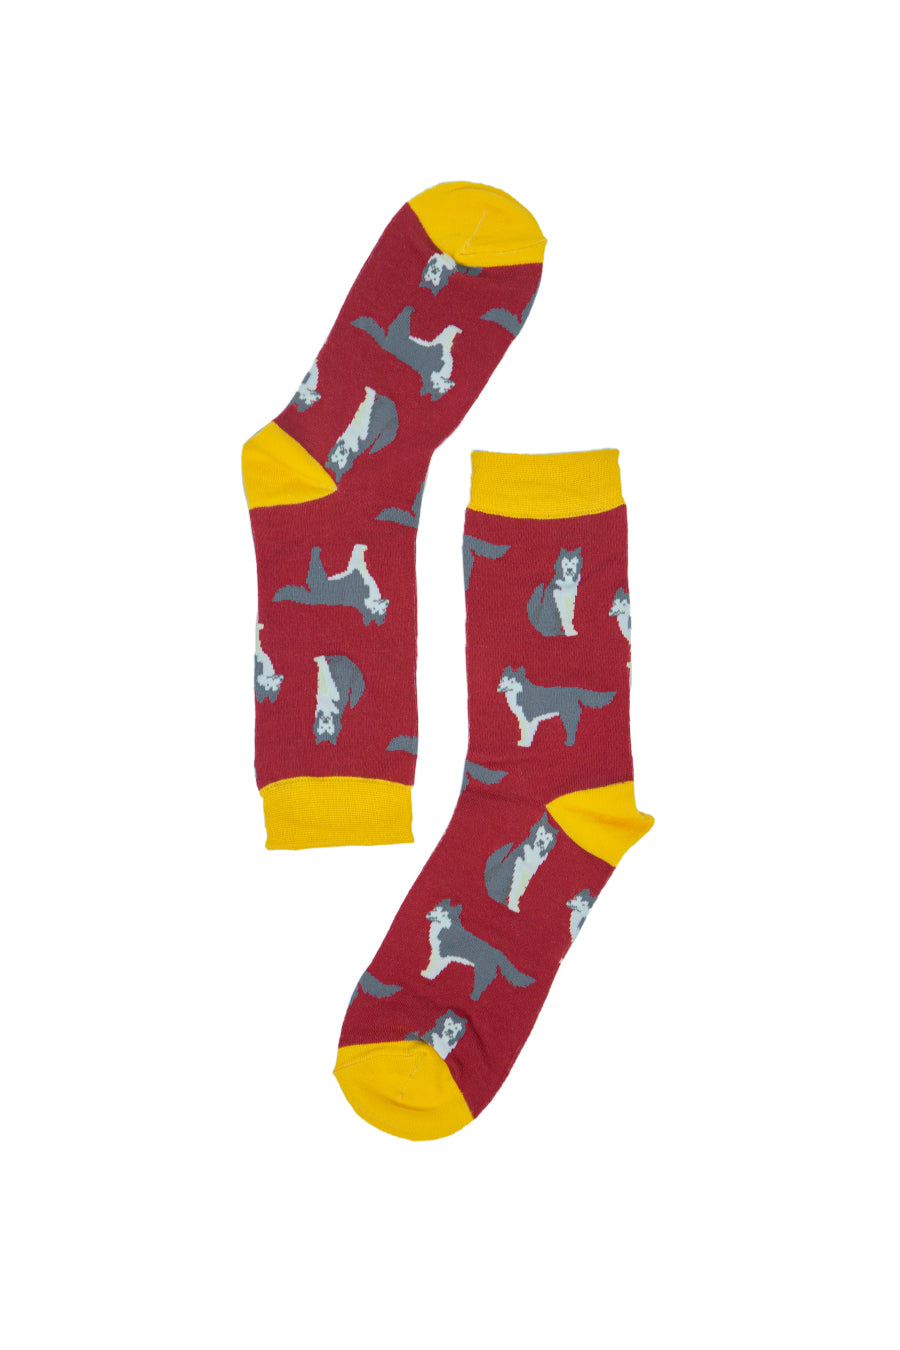 red and yellow bamboo socks with an all over pattern of husky dogs